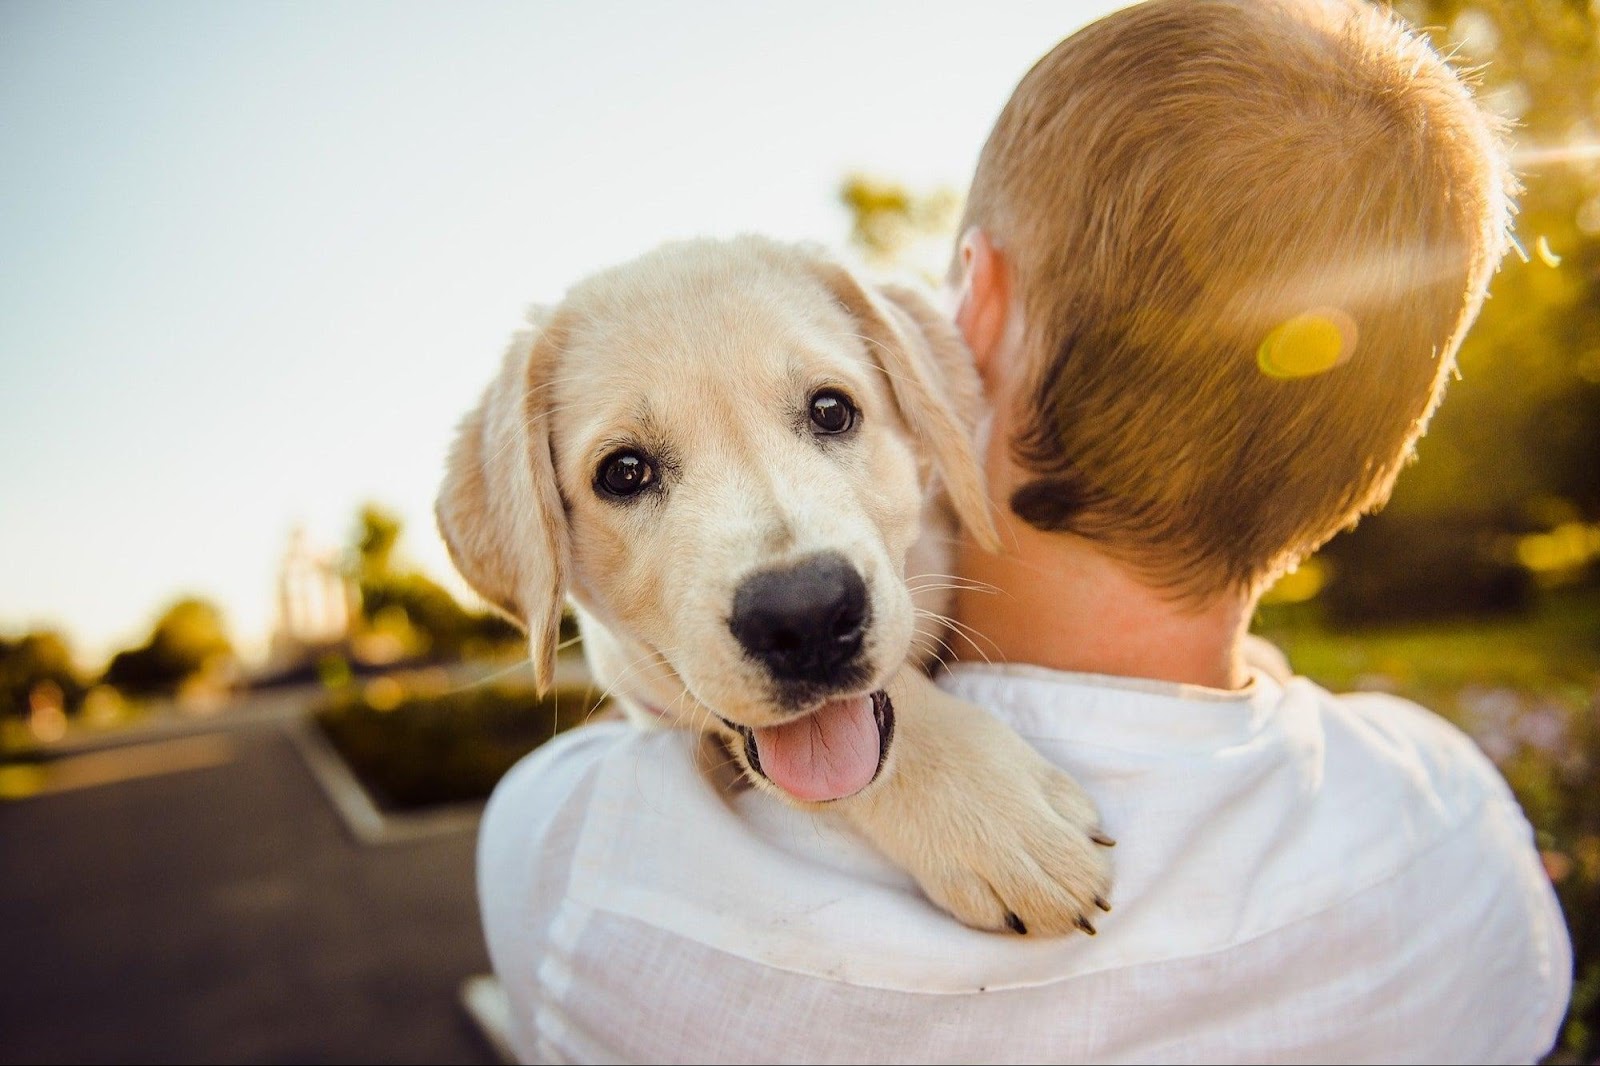 Some Ways To Build A Bond With Your Dog